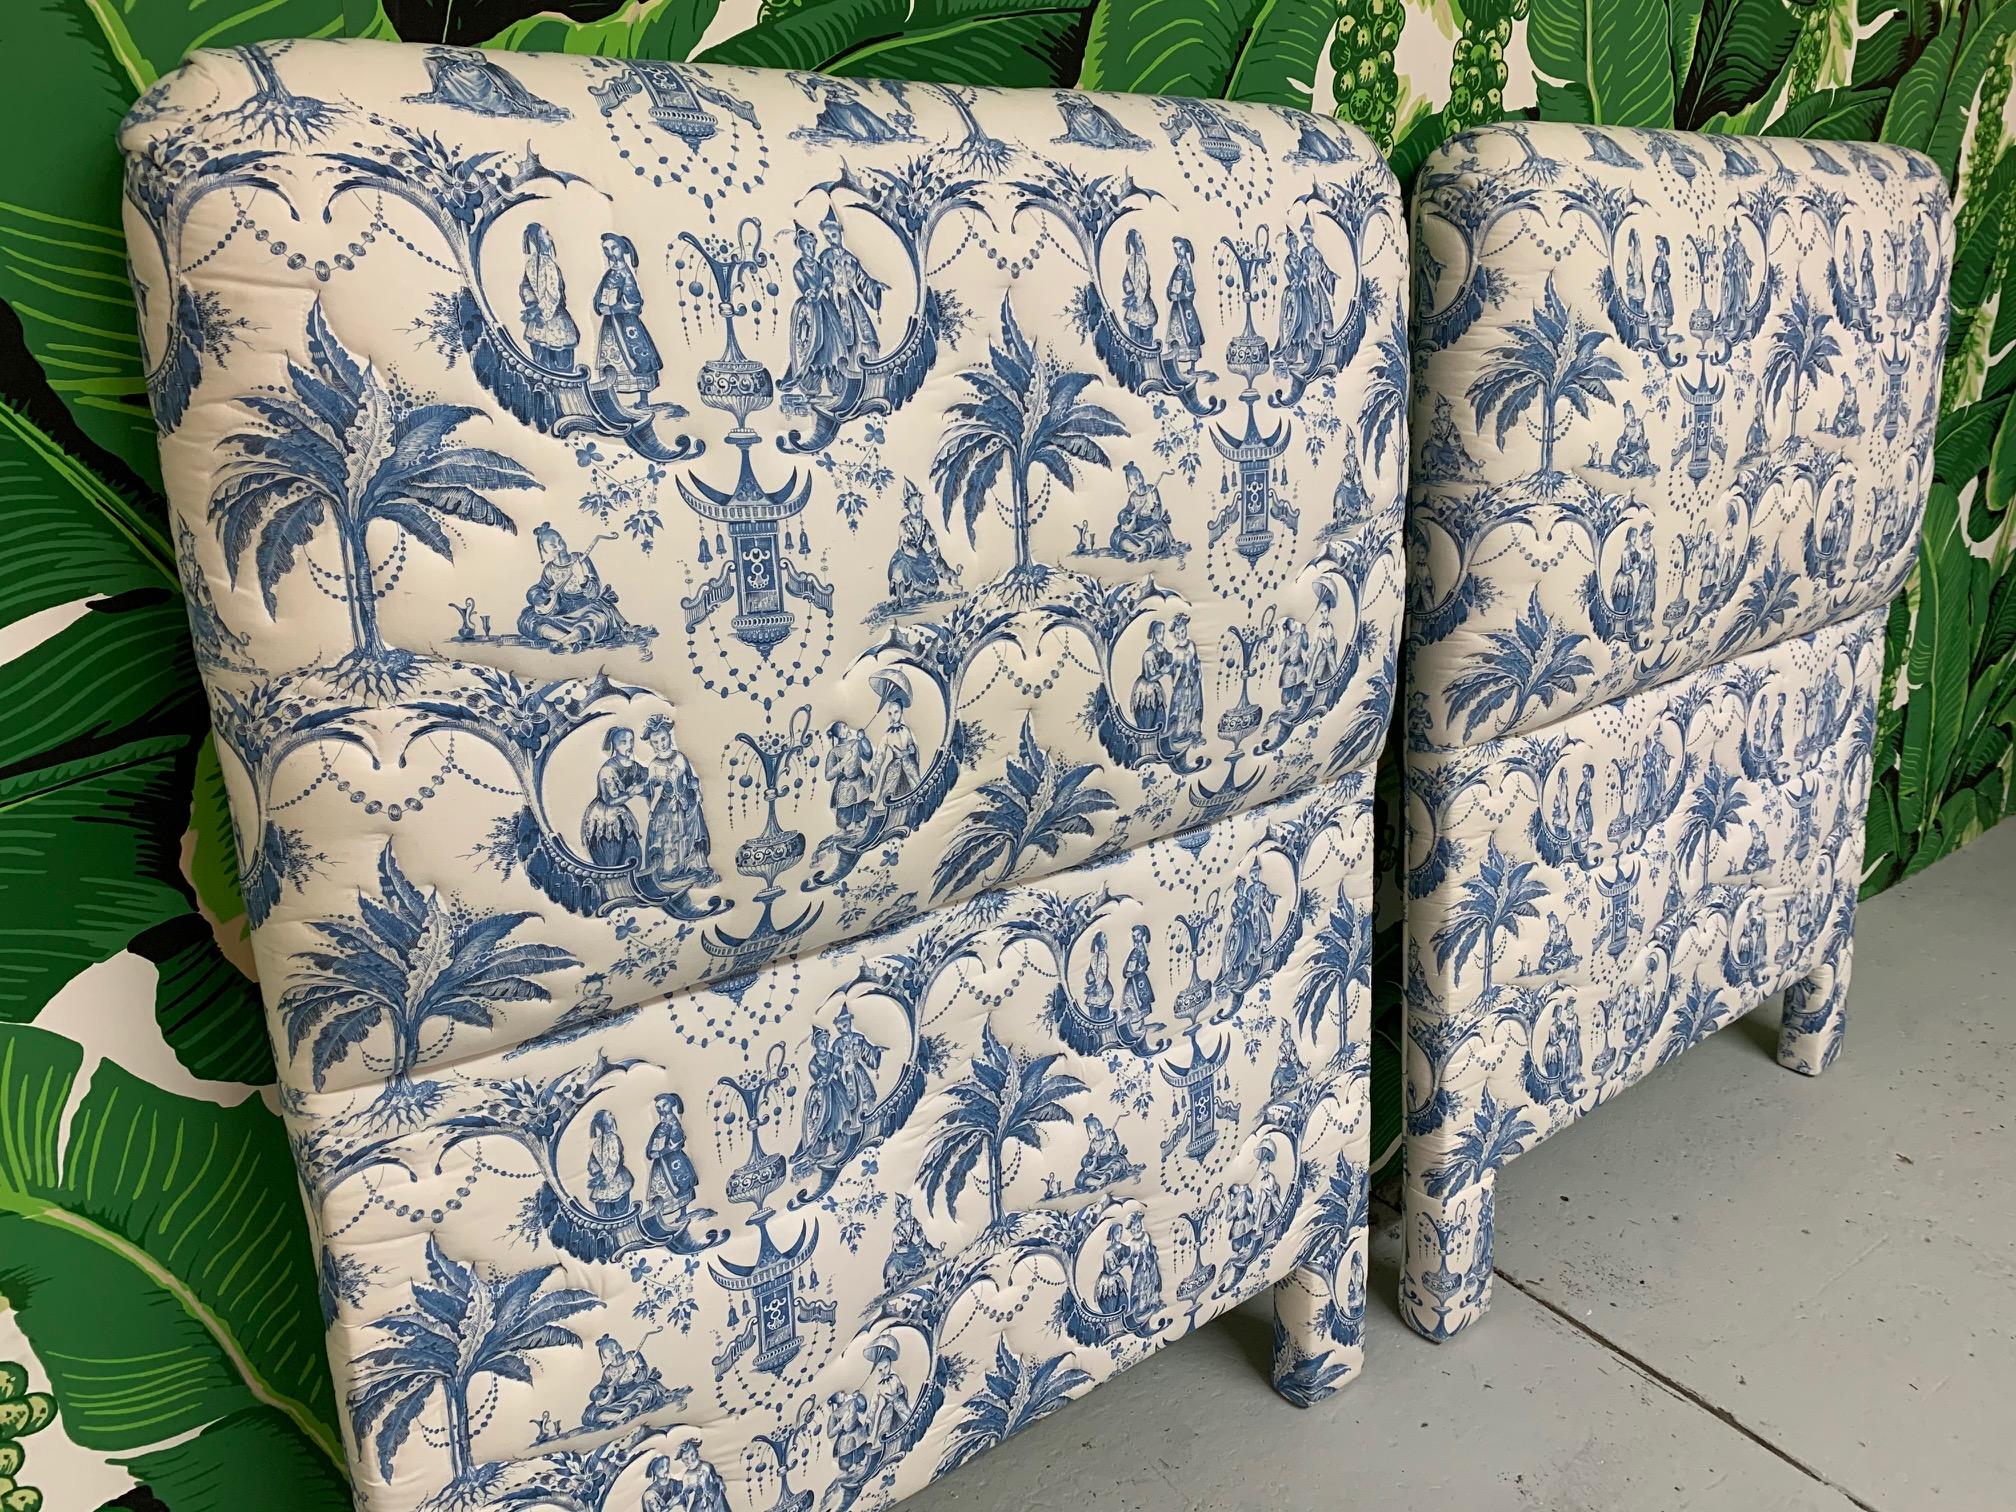 Pair of twin headboards upholstered in blue and white Asian chinoiserie style fabric featuring palm trees, pagodas, and Chinese characters. Very plush with thick cushioning. Very good condition with no stains, tears, or odors.